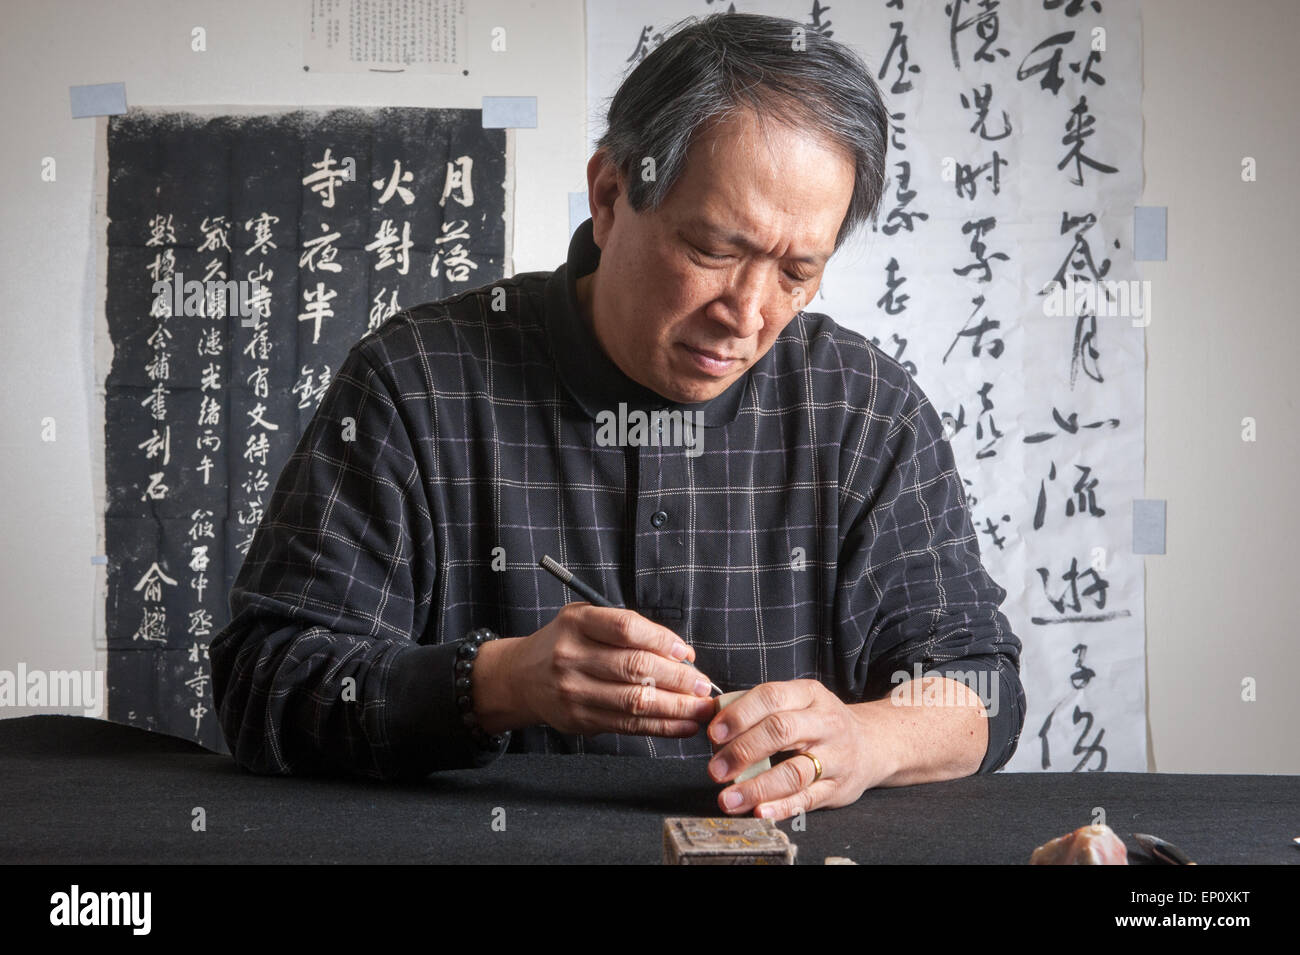 Asian man carving Chinese seal stamp in Gaithersburg, Maryland. Calligraphy panels can be seen in the background. Stock Photo